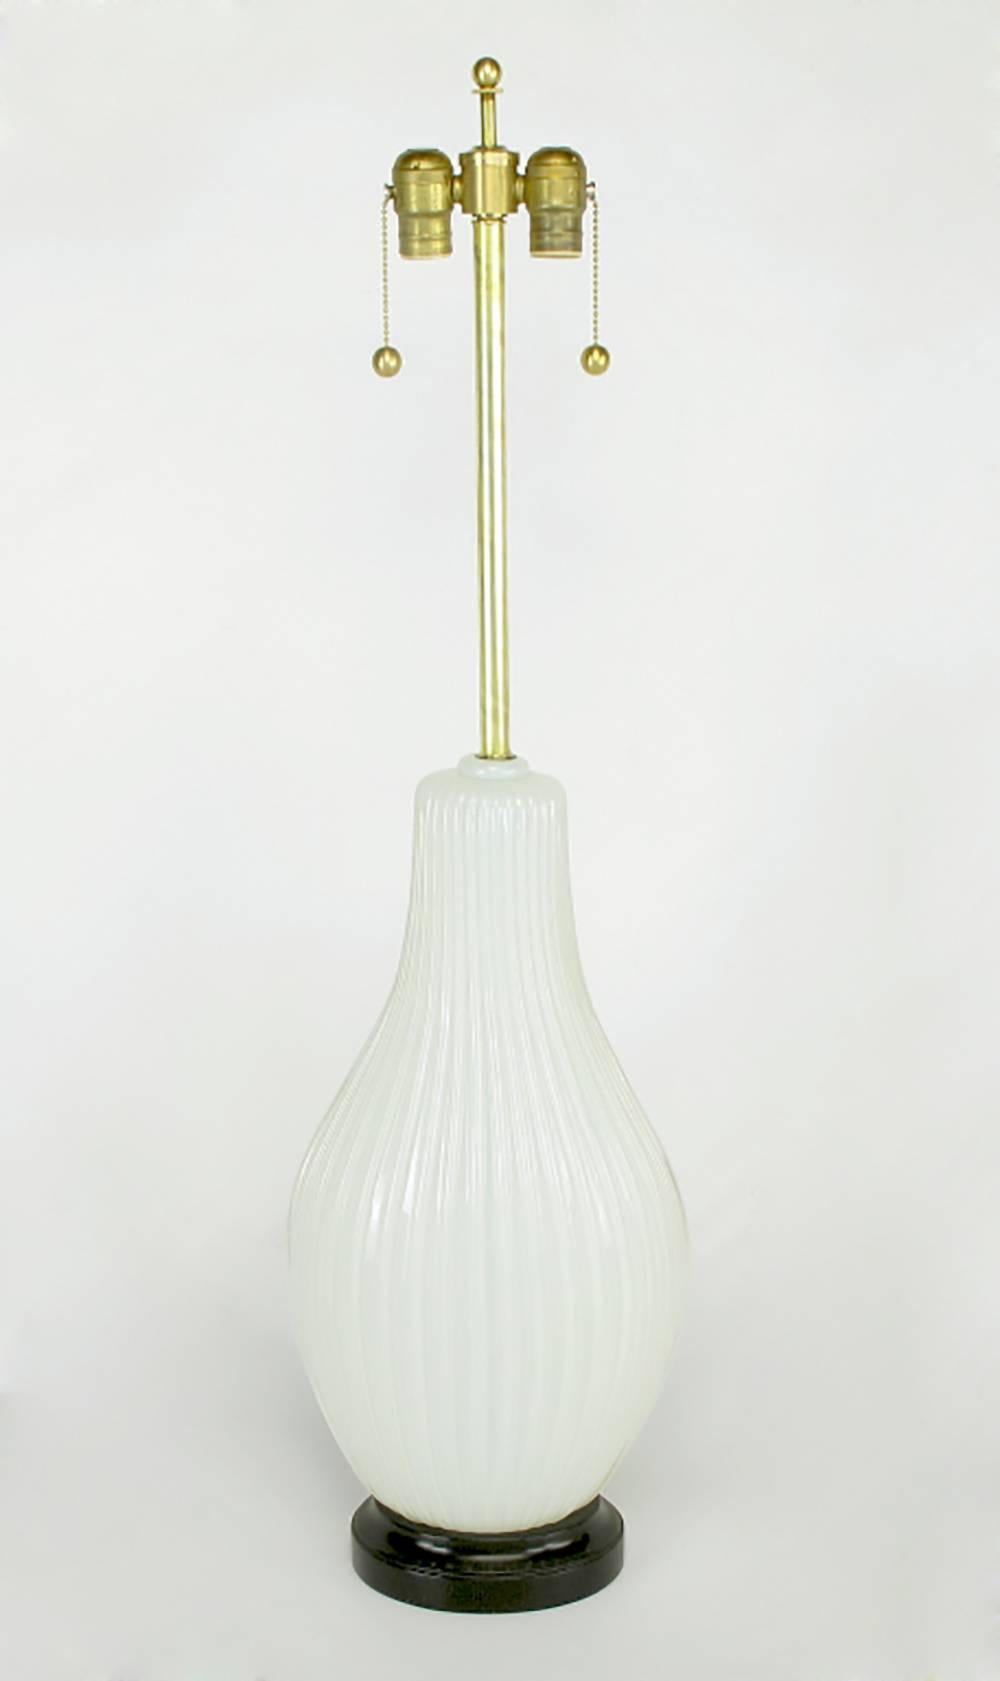 Ribbed and opaline Murano glass table lamp with black lacquered metal base. Elongated gourd form body with vertical ribbing. Brass stem and double socket cluster. Sold sans shade.